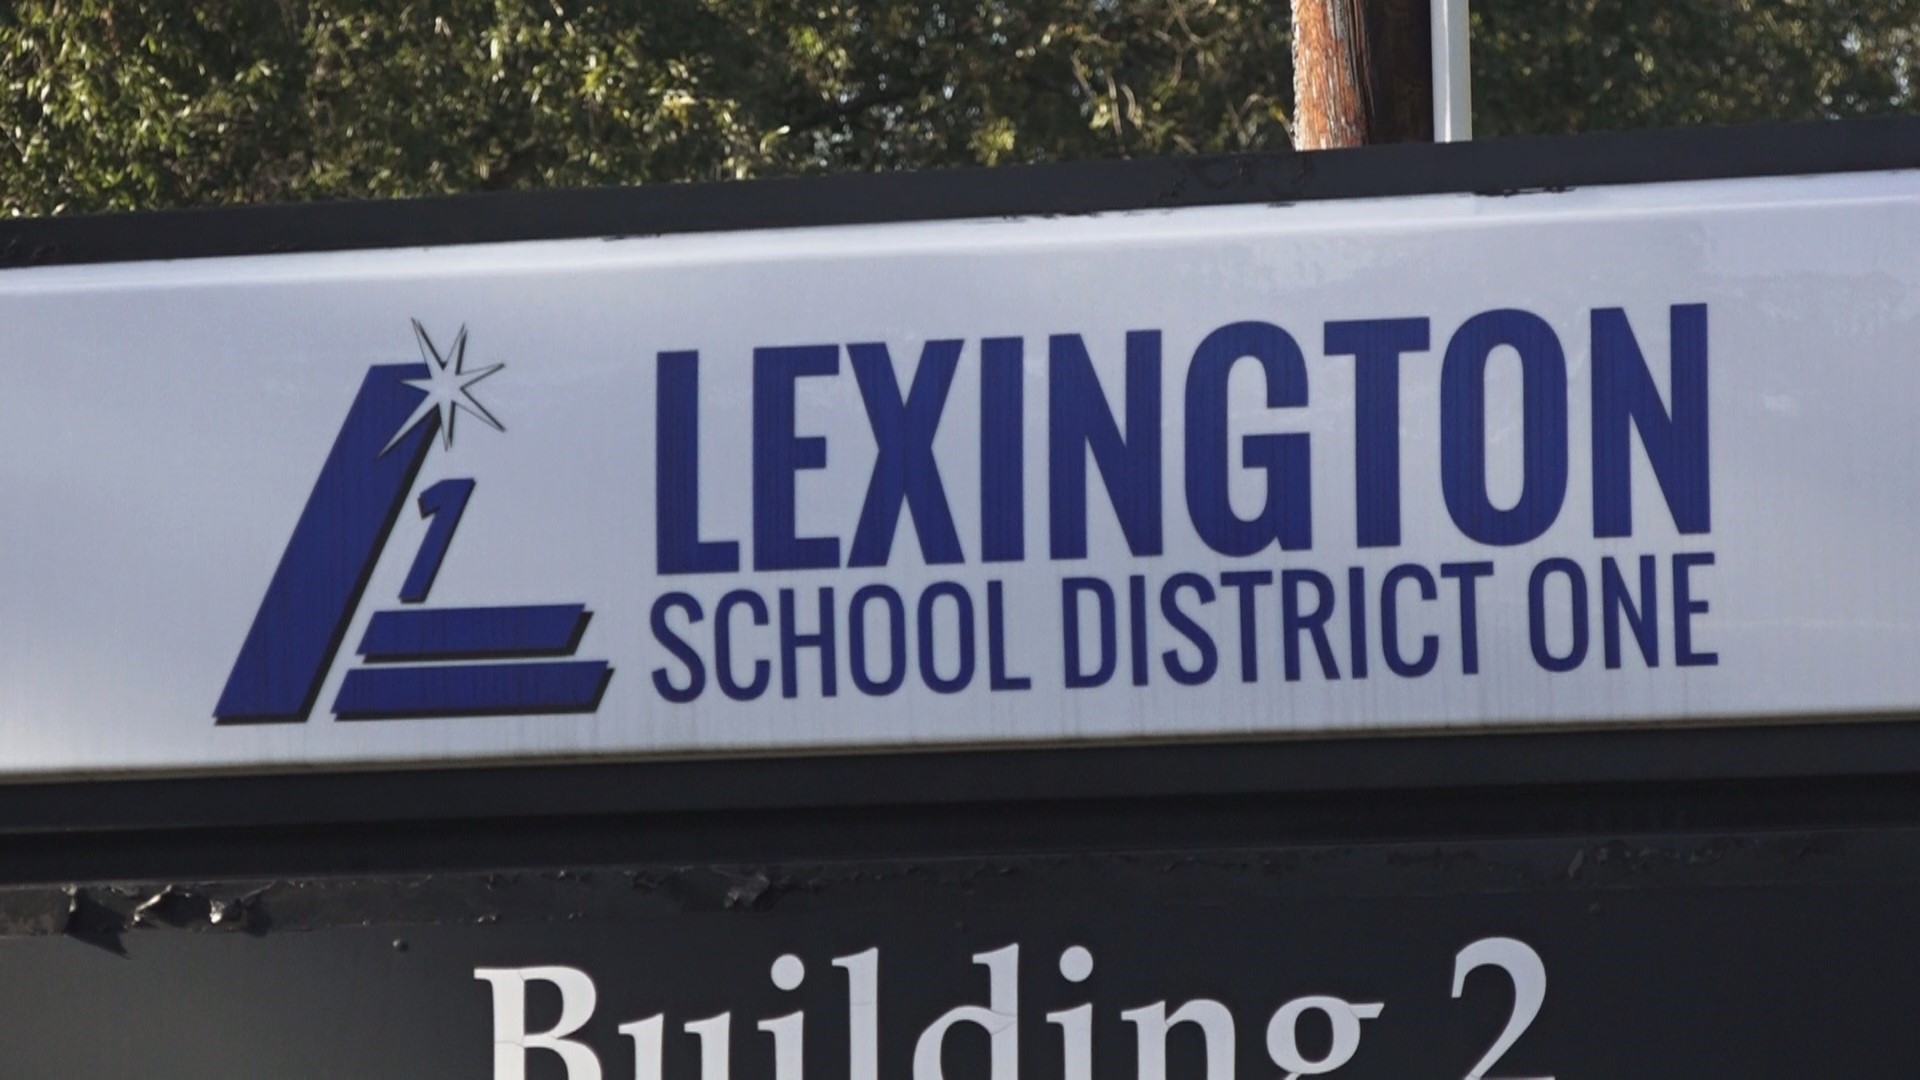 Lexington School District One says a lawsuit filed by the South Carolina Freedom Caucus has been dismissed after the two reached a settlement agreement over EL.